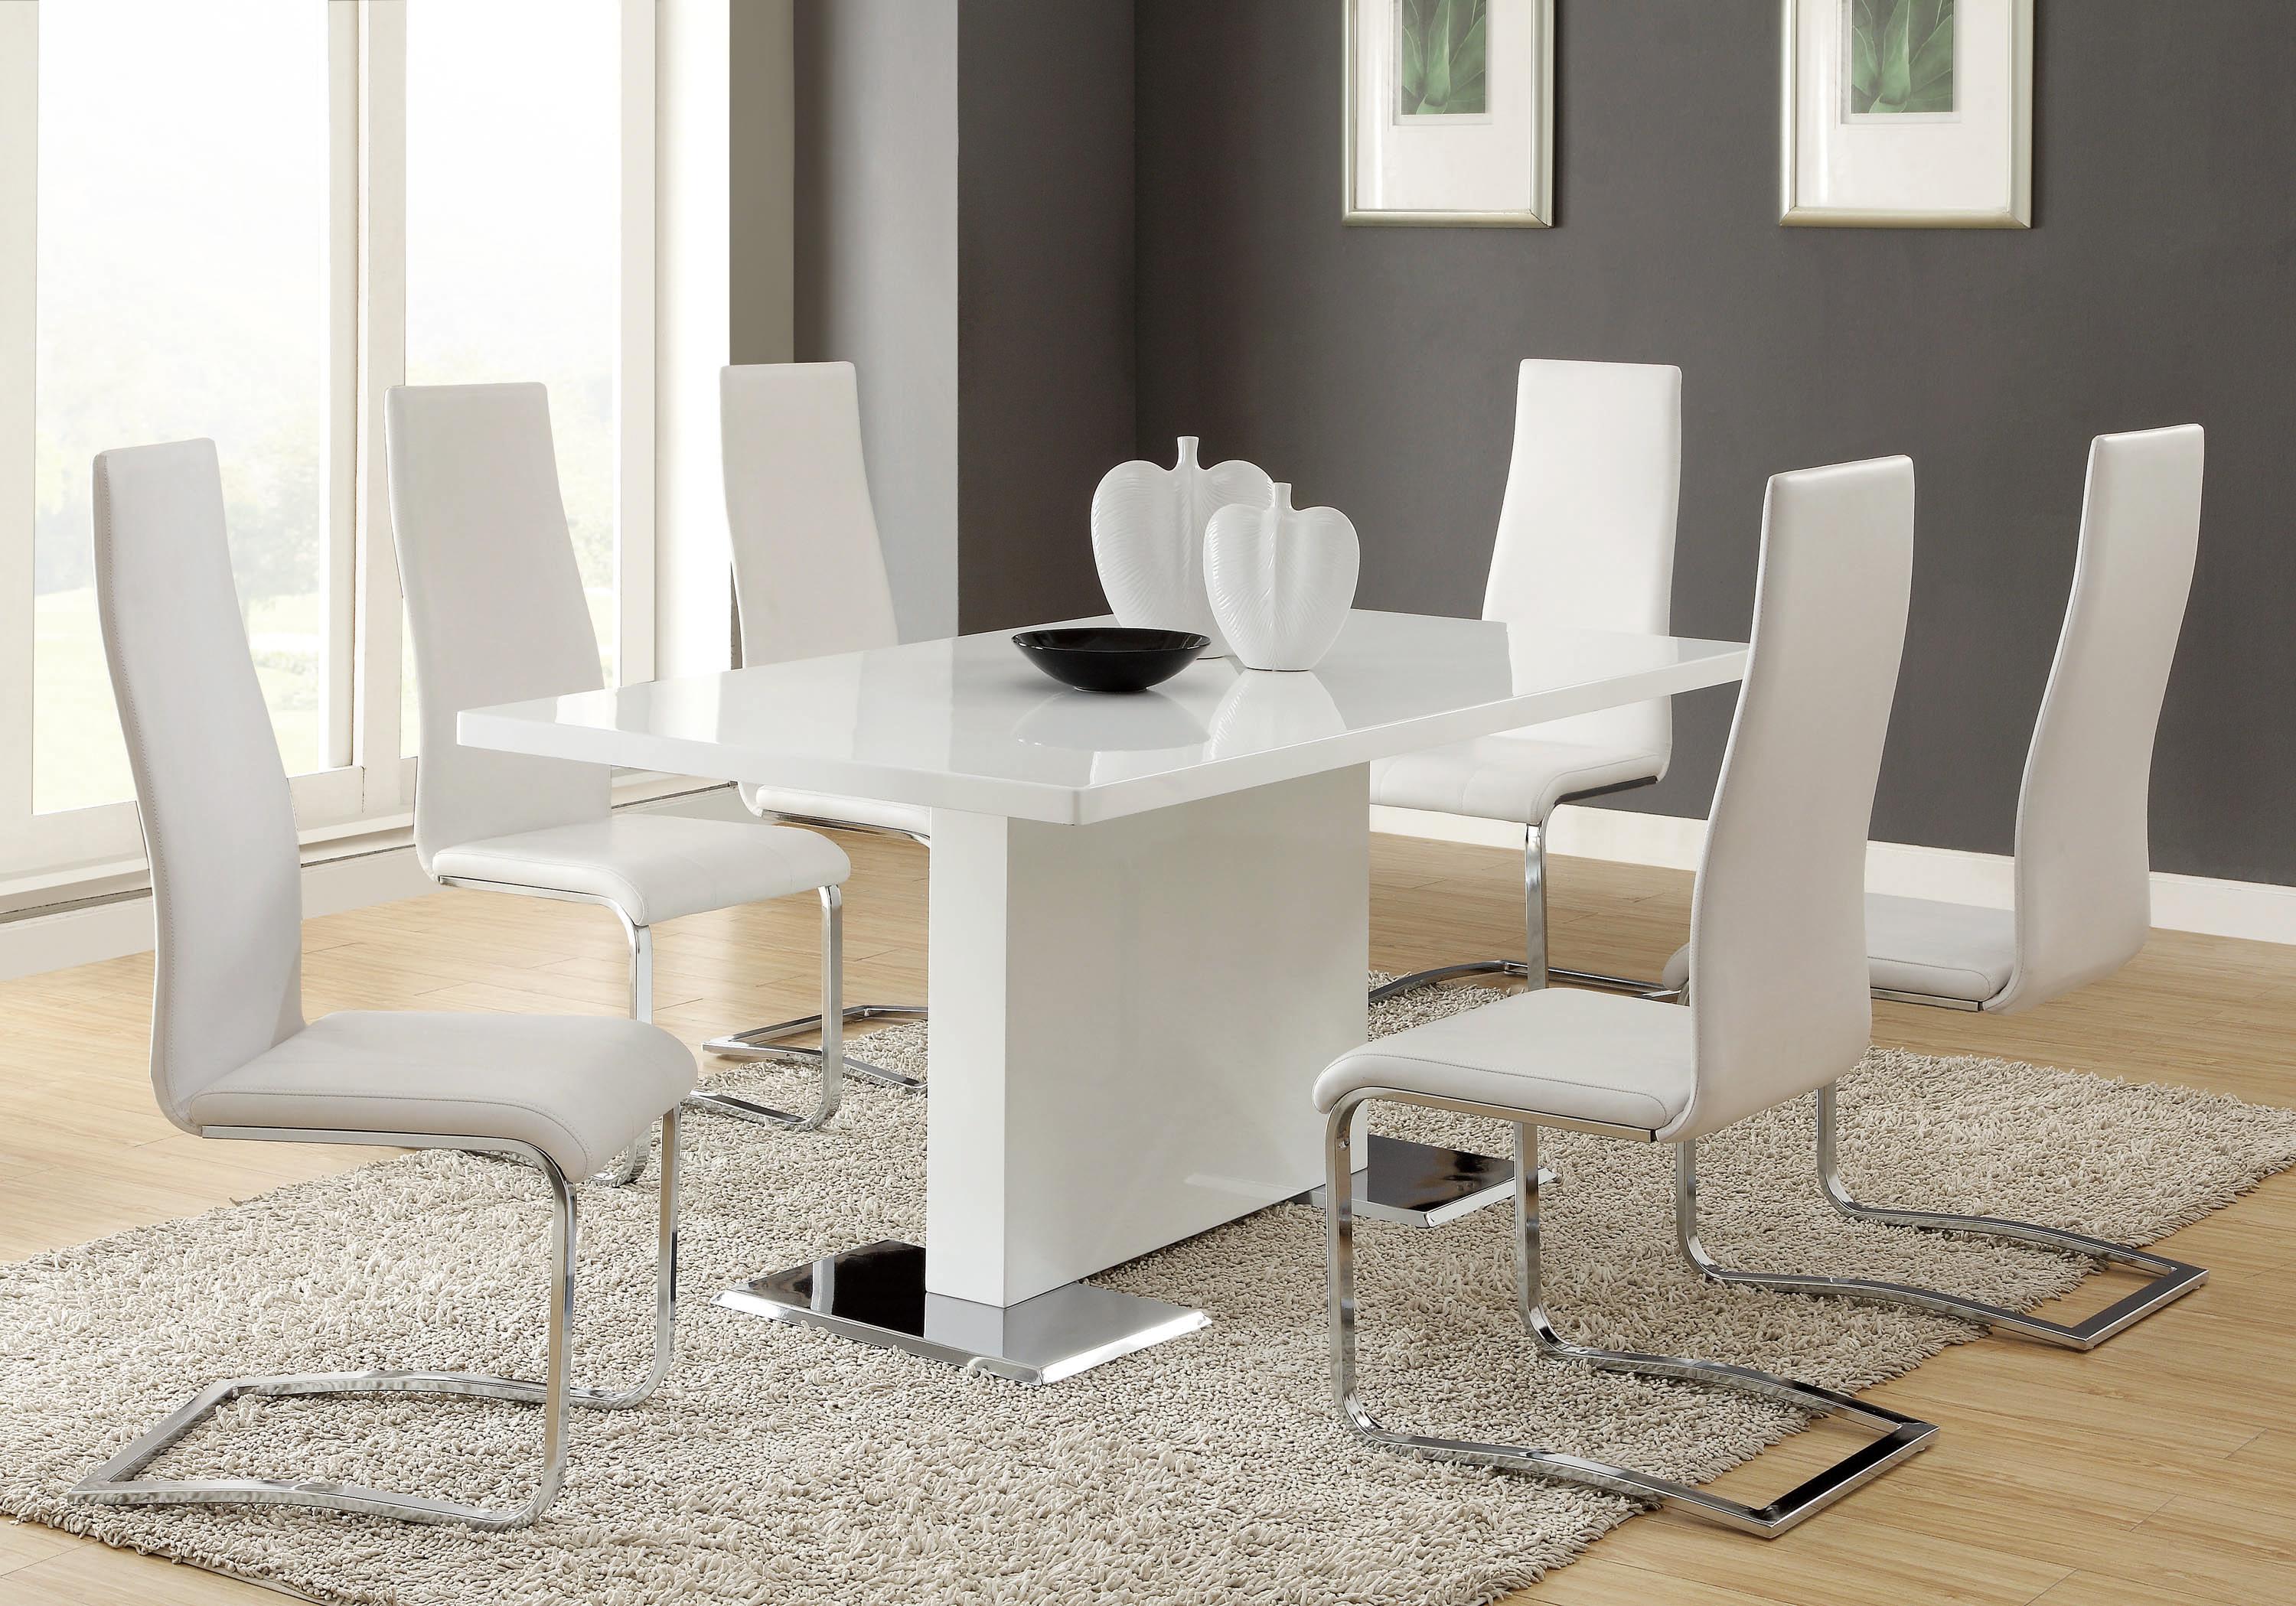 Contemporary Dining Room Set 102310-WHT-S5 Anges 102310-WHT-S5 in White 